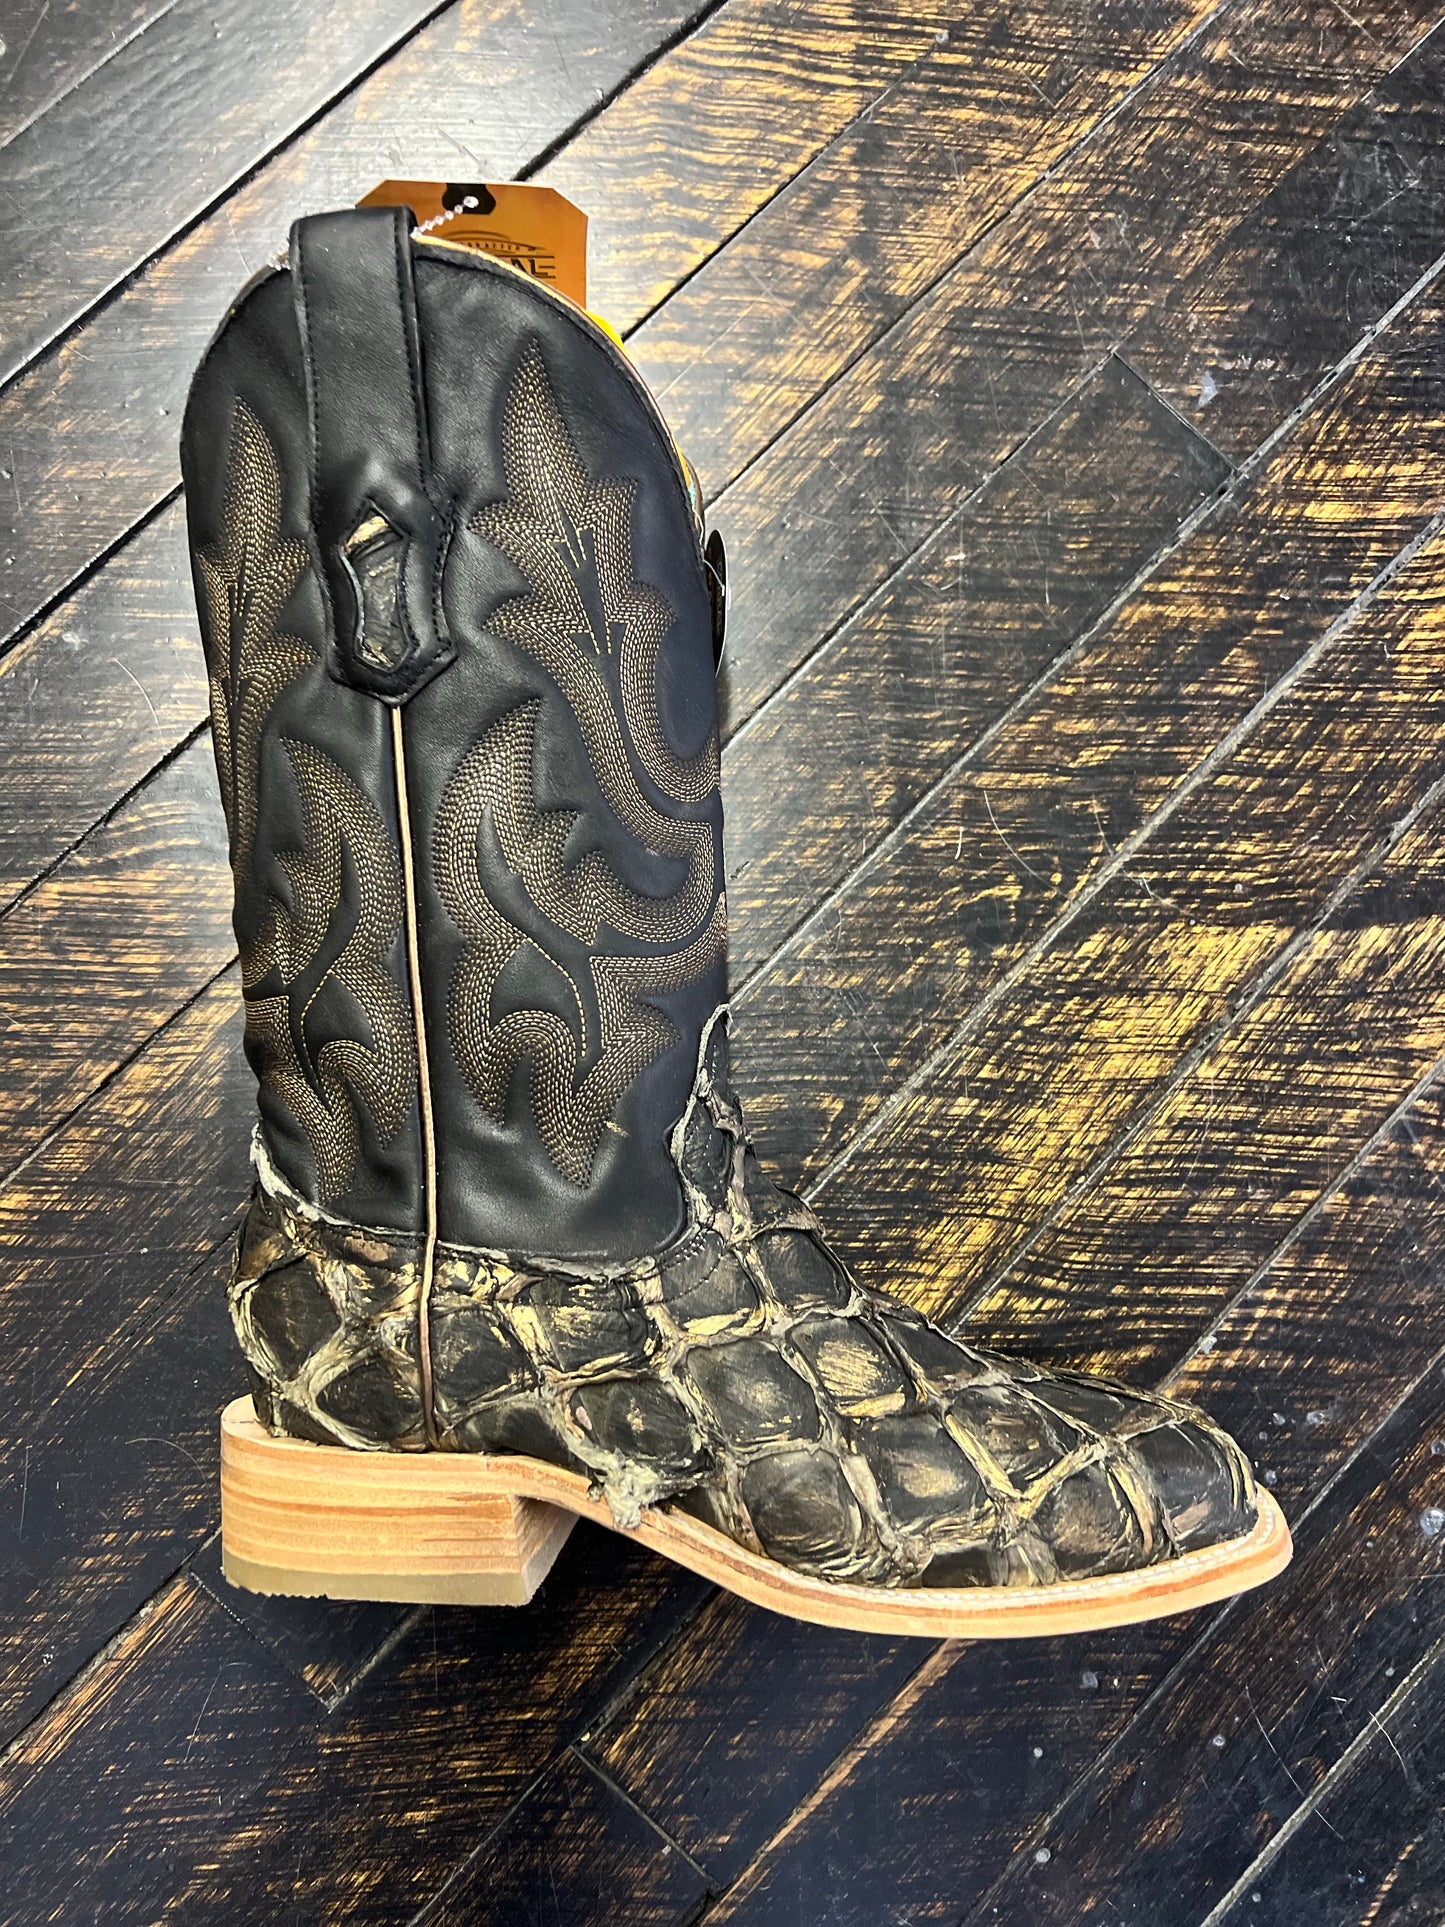 The Grace Women's Corral Black Fish Handcrafted Boots